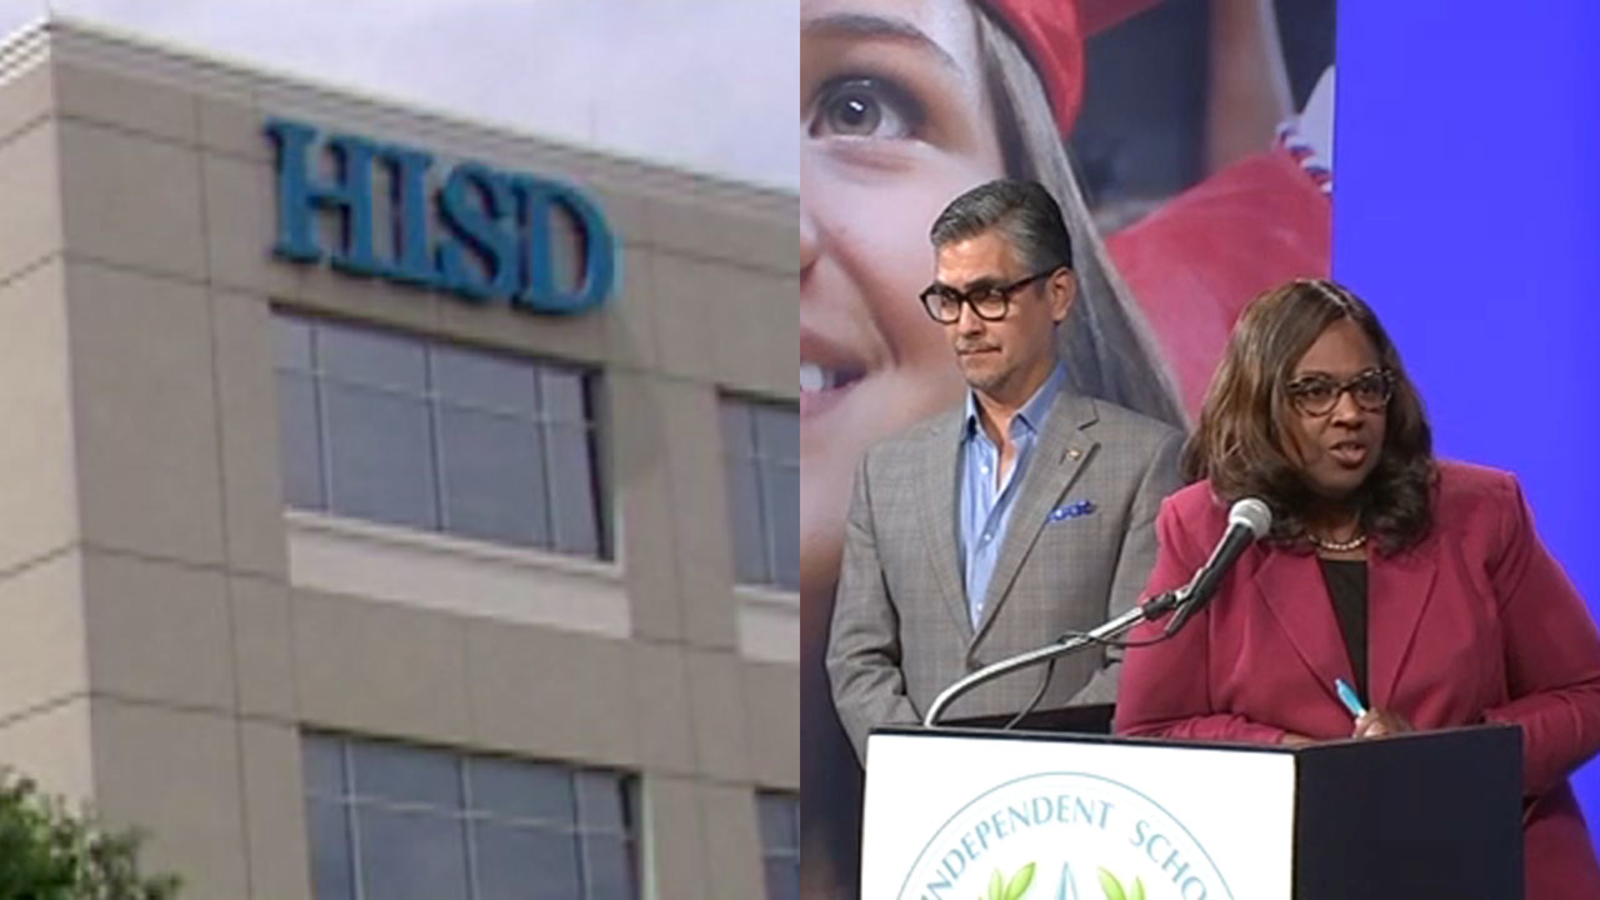 Hisd Pitches Teacher Pay Raises Up To Percent As Deadline Looms